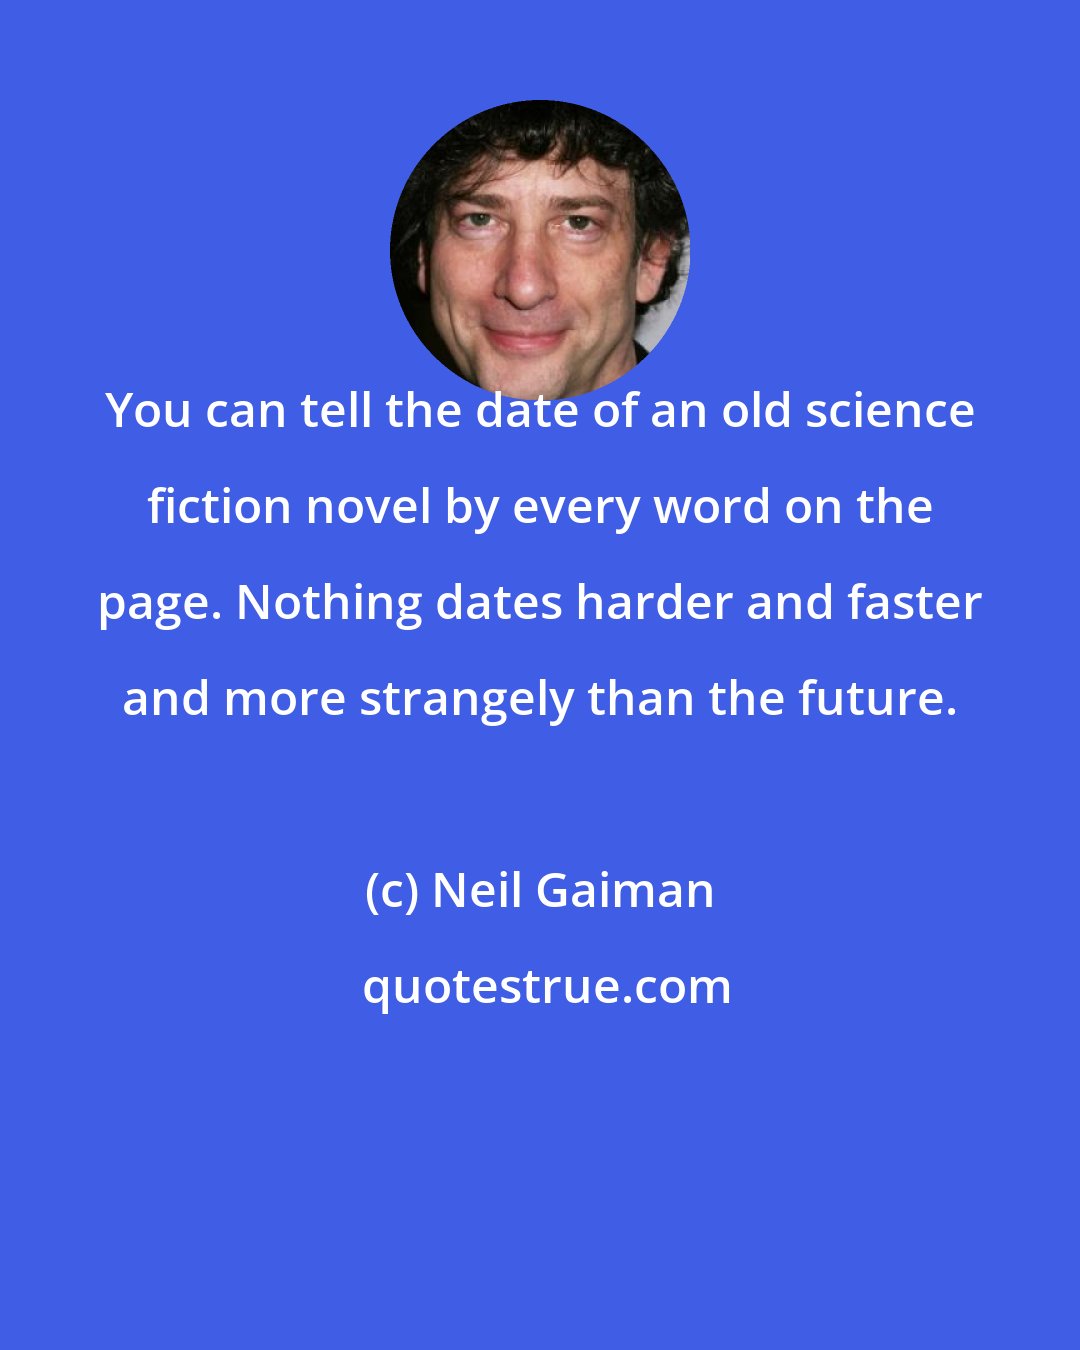 Neil Gaiman: You can tell the date of an old science fiction novel by every word on the page. Nothing dates harder and faster and more strangely than the future.